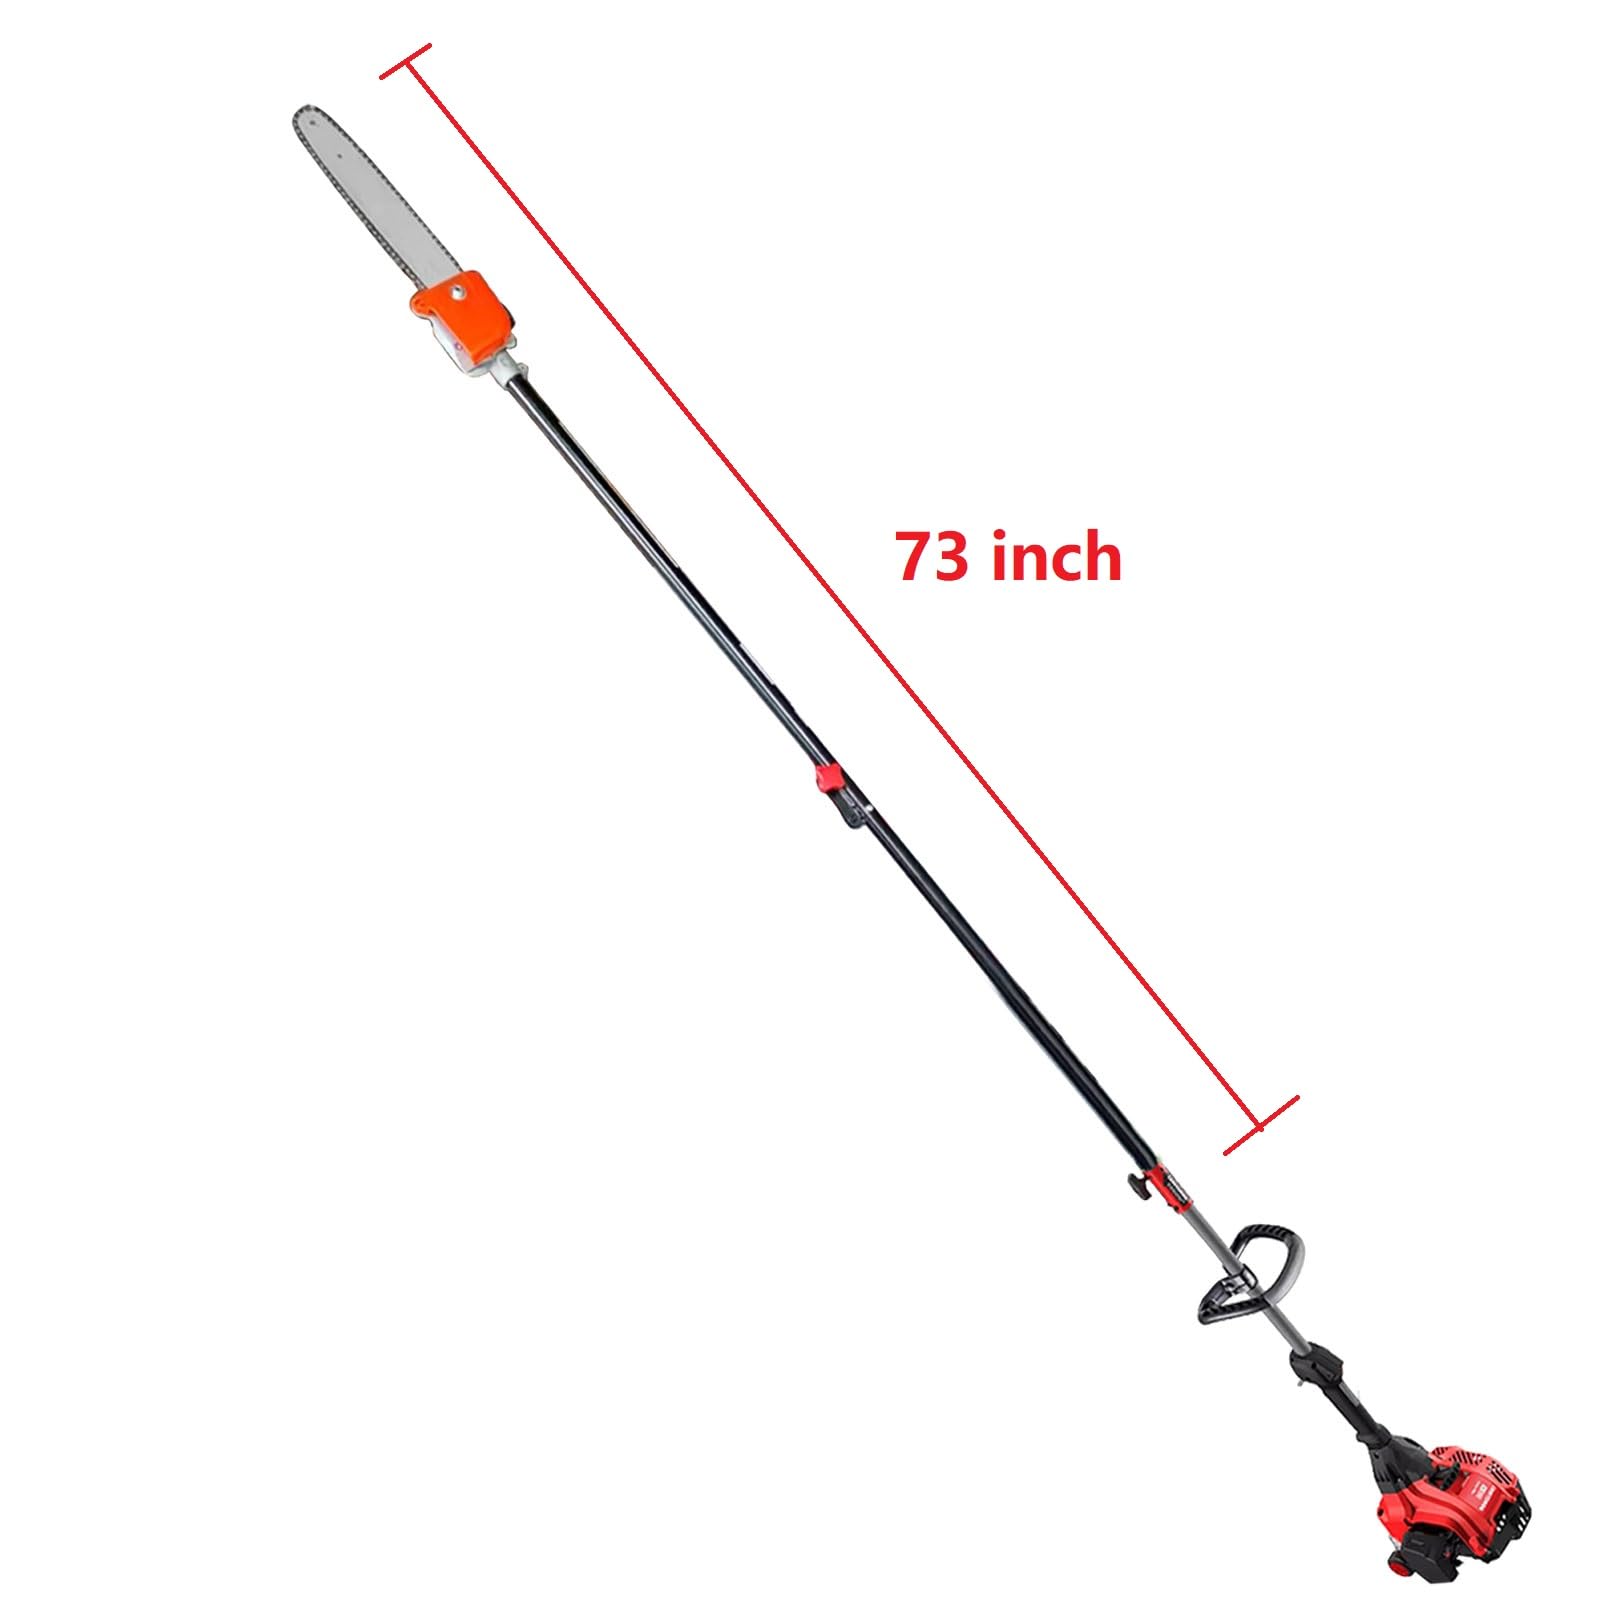 Gabasinover,Replacement parts Pole saw Attachment for Attachment Capable String Trimmers, Polesaws, and Powerheads fits for Hus 128LD, most brushcutters and Powerheads (Black）